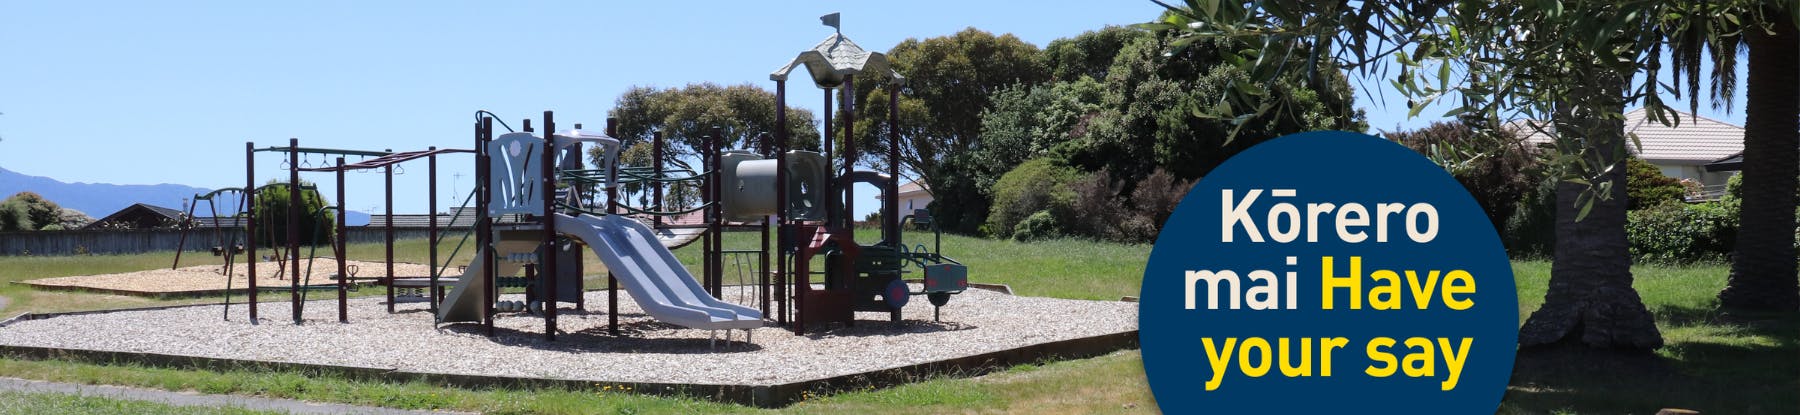 Regent drive playground equipment that is due for an upgrade